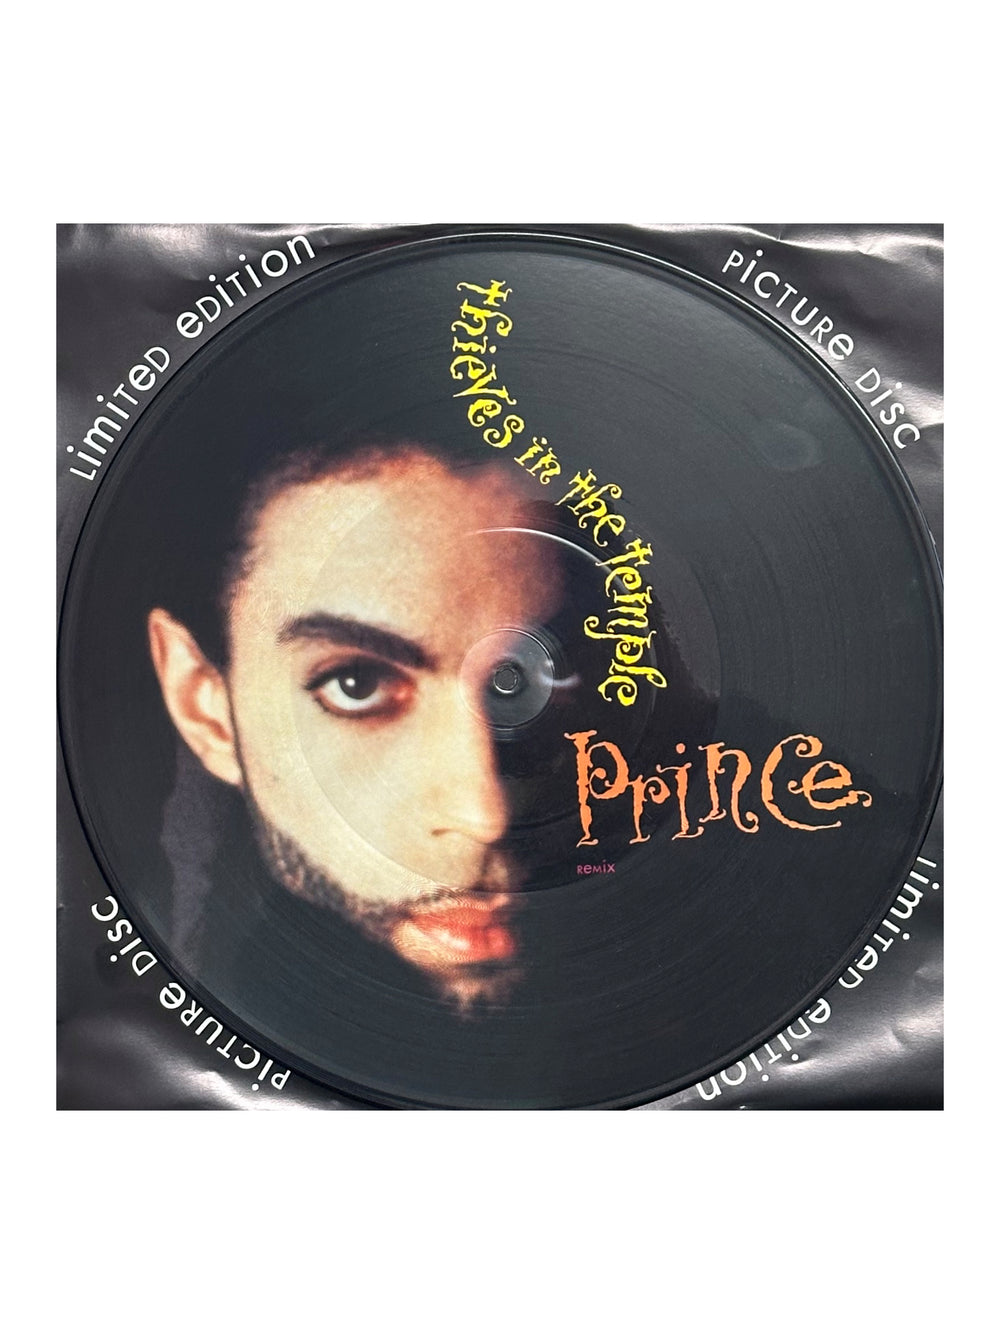 Prince – Thieves In The Temple (Remix) Vinyl 12" Limited Edition Picture Disc UK Preloved 1990